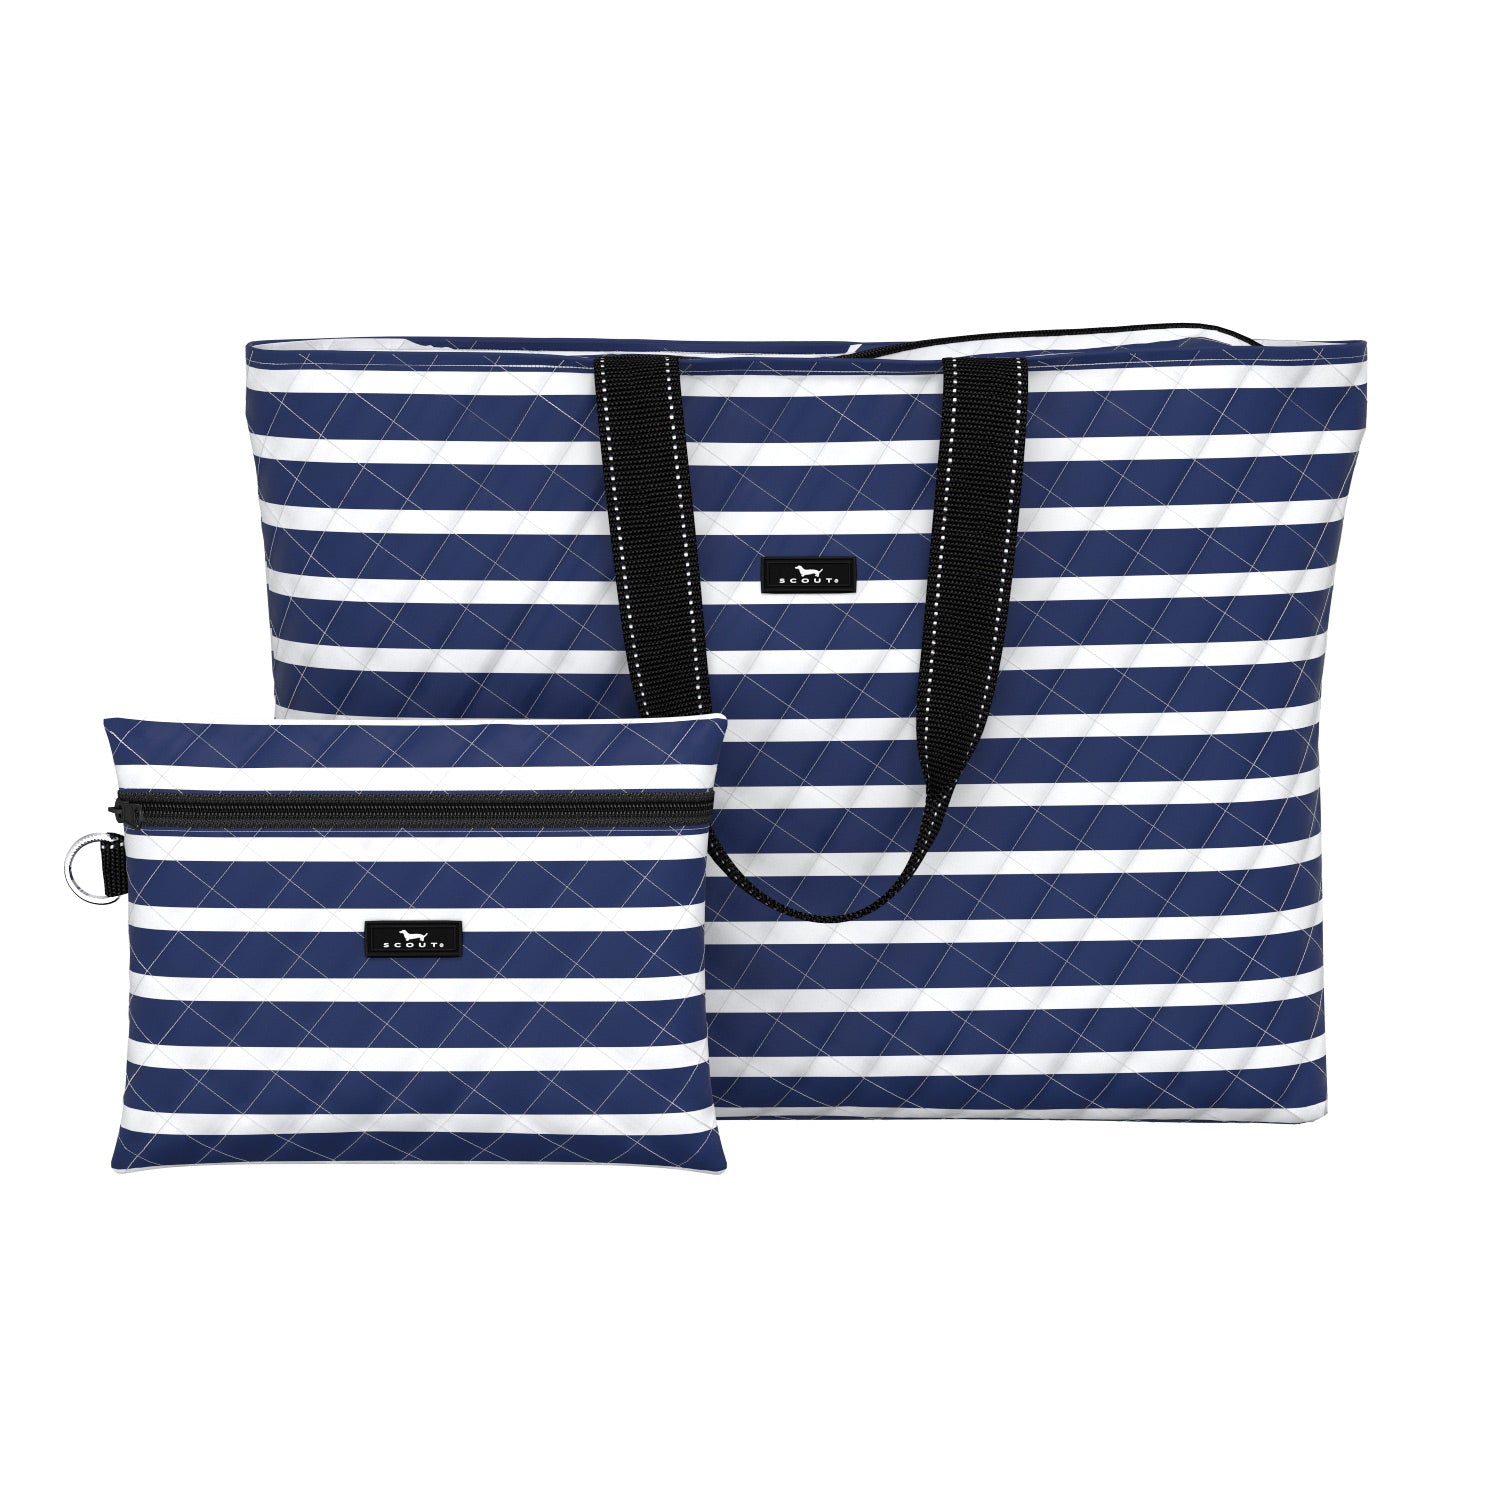 Le Weekend Large Canvas Tote Packable Bag, Navy, Blue